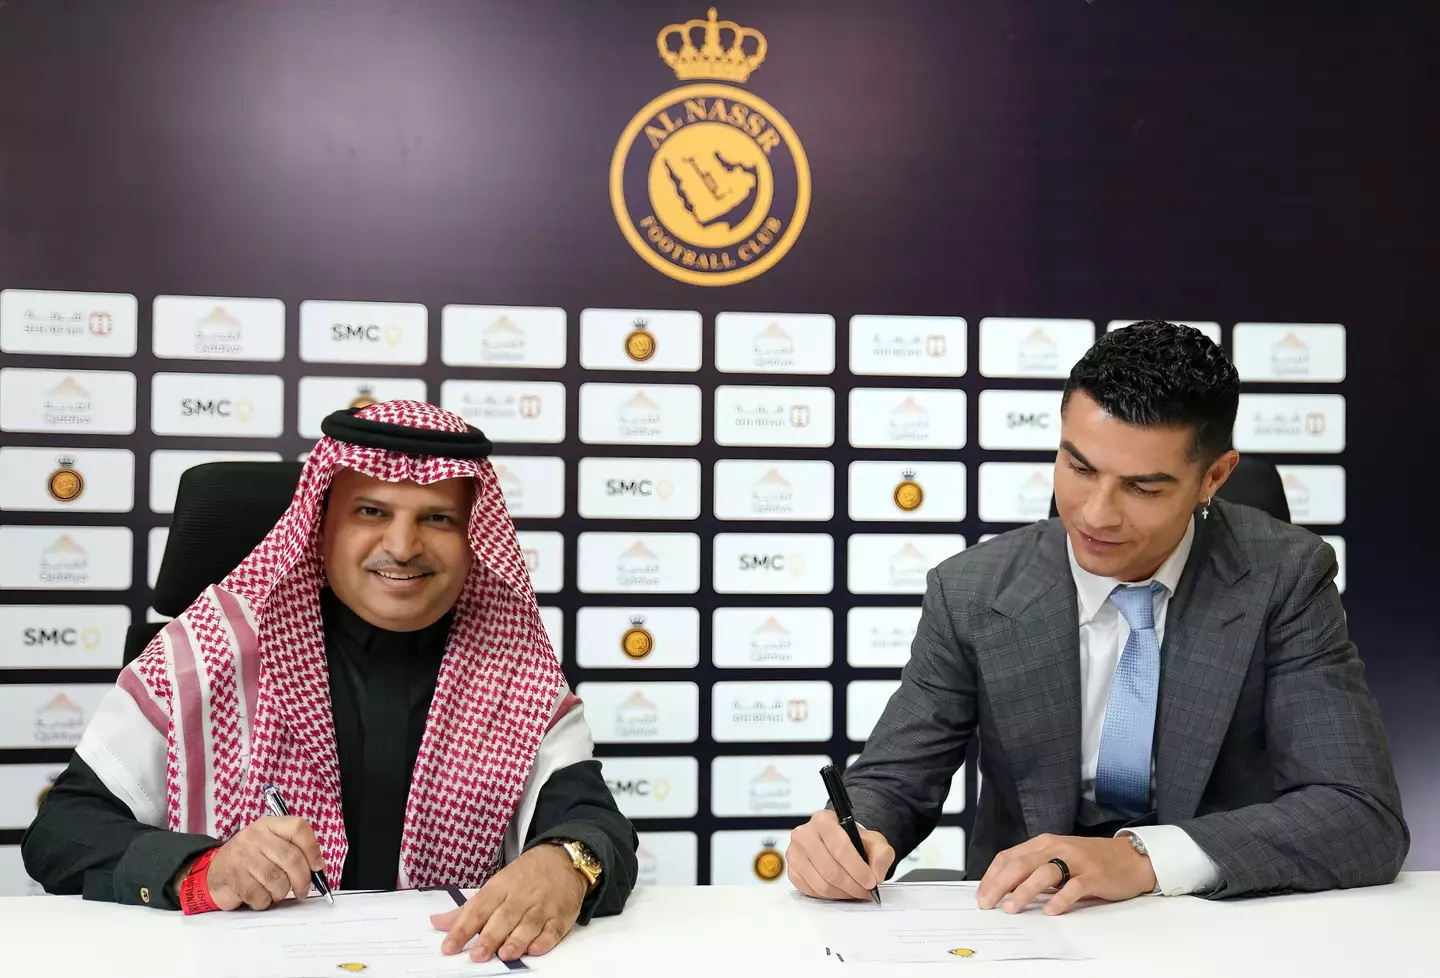 Ronaldo signing his contract with Al Nassr in midweek. (Image